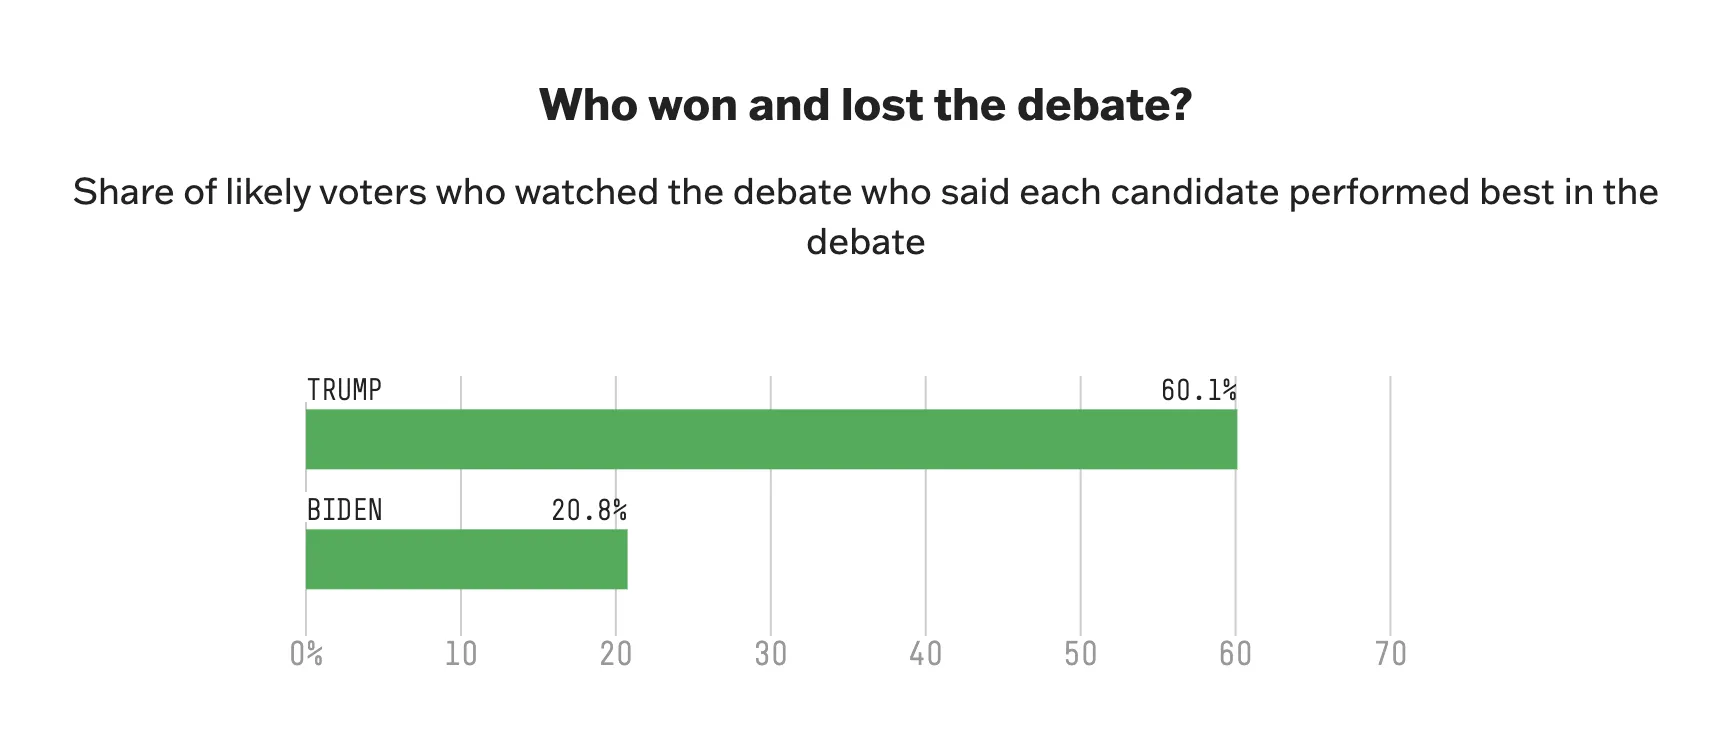 Biden loses the debate but still has voter support: poll results